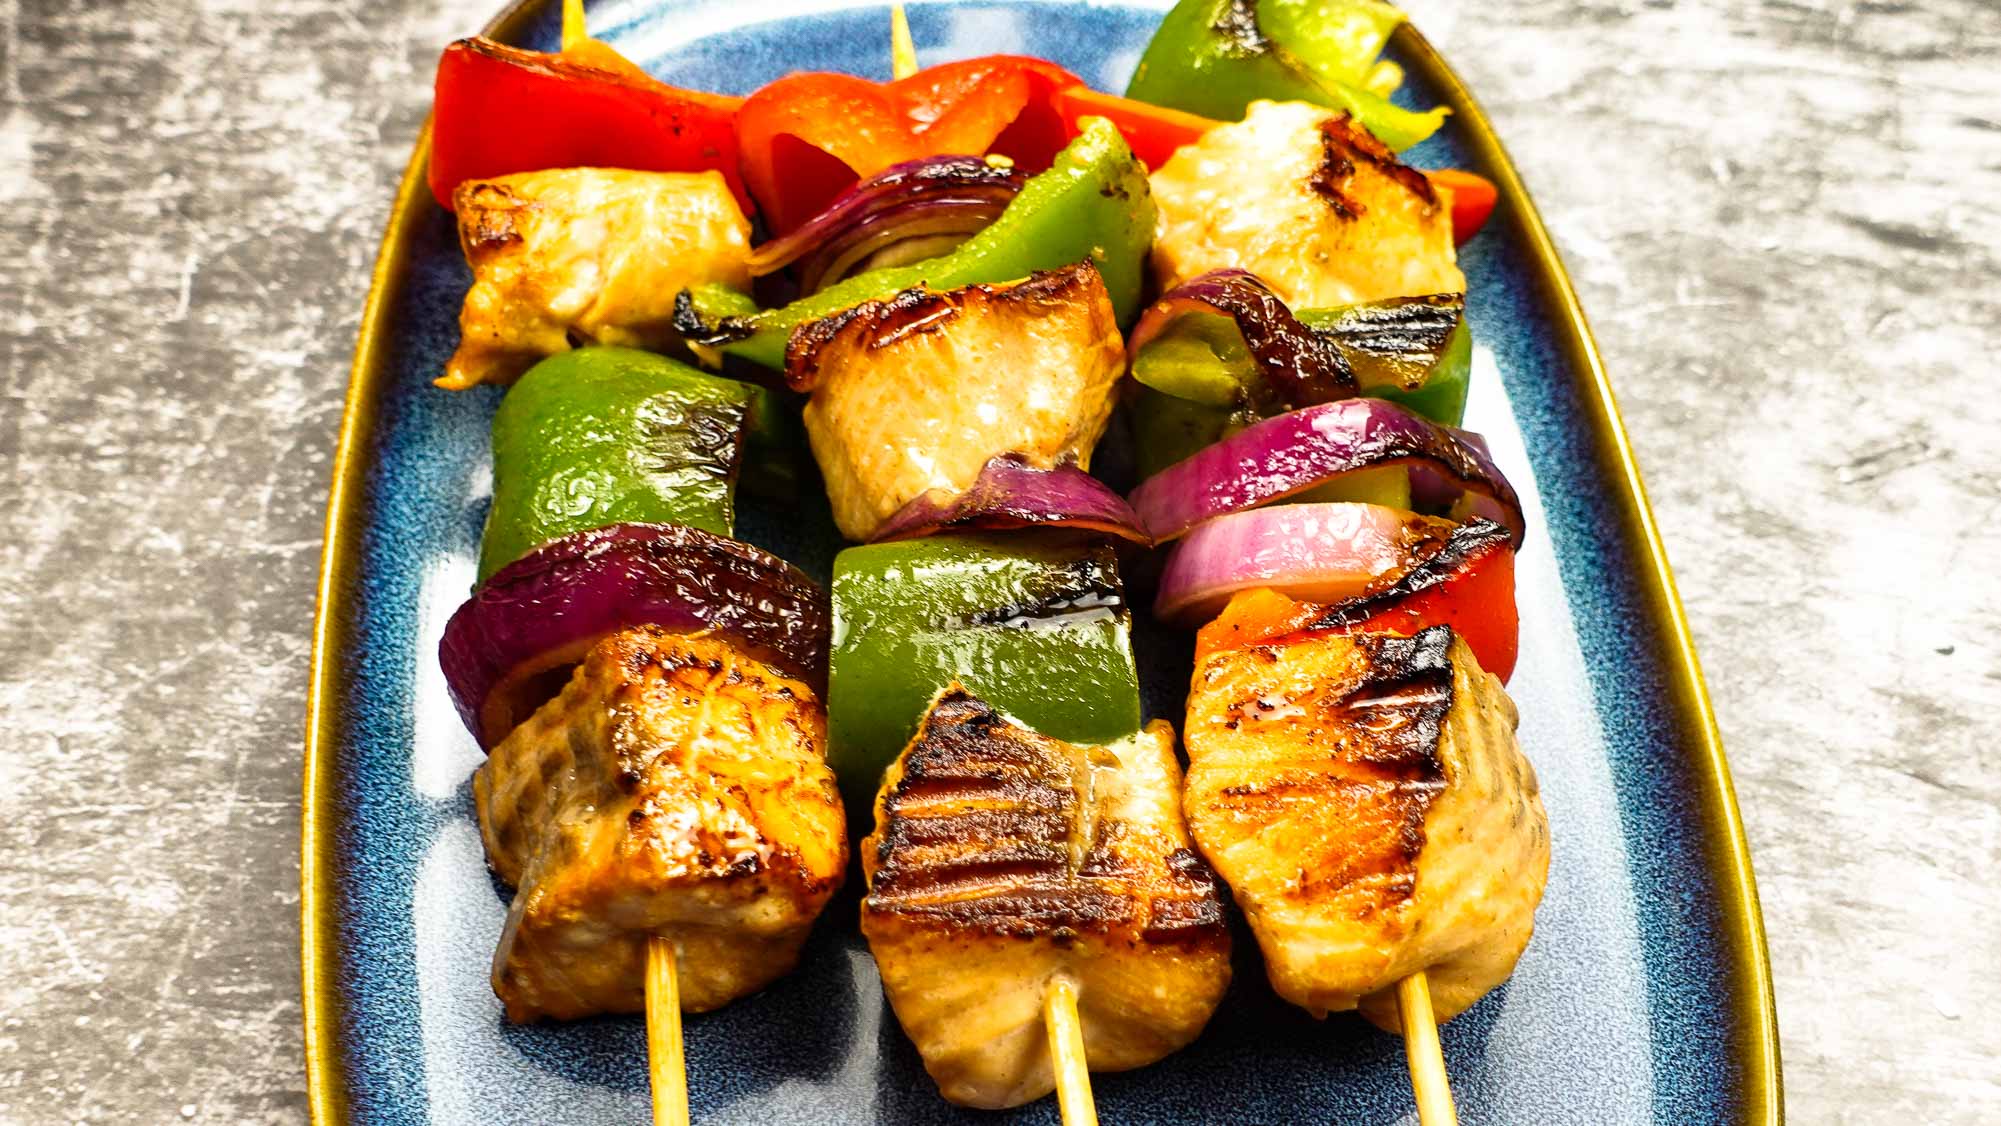 Juicy and perfectly cooked salmon kabobs on a blue plate.